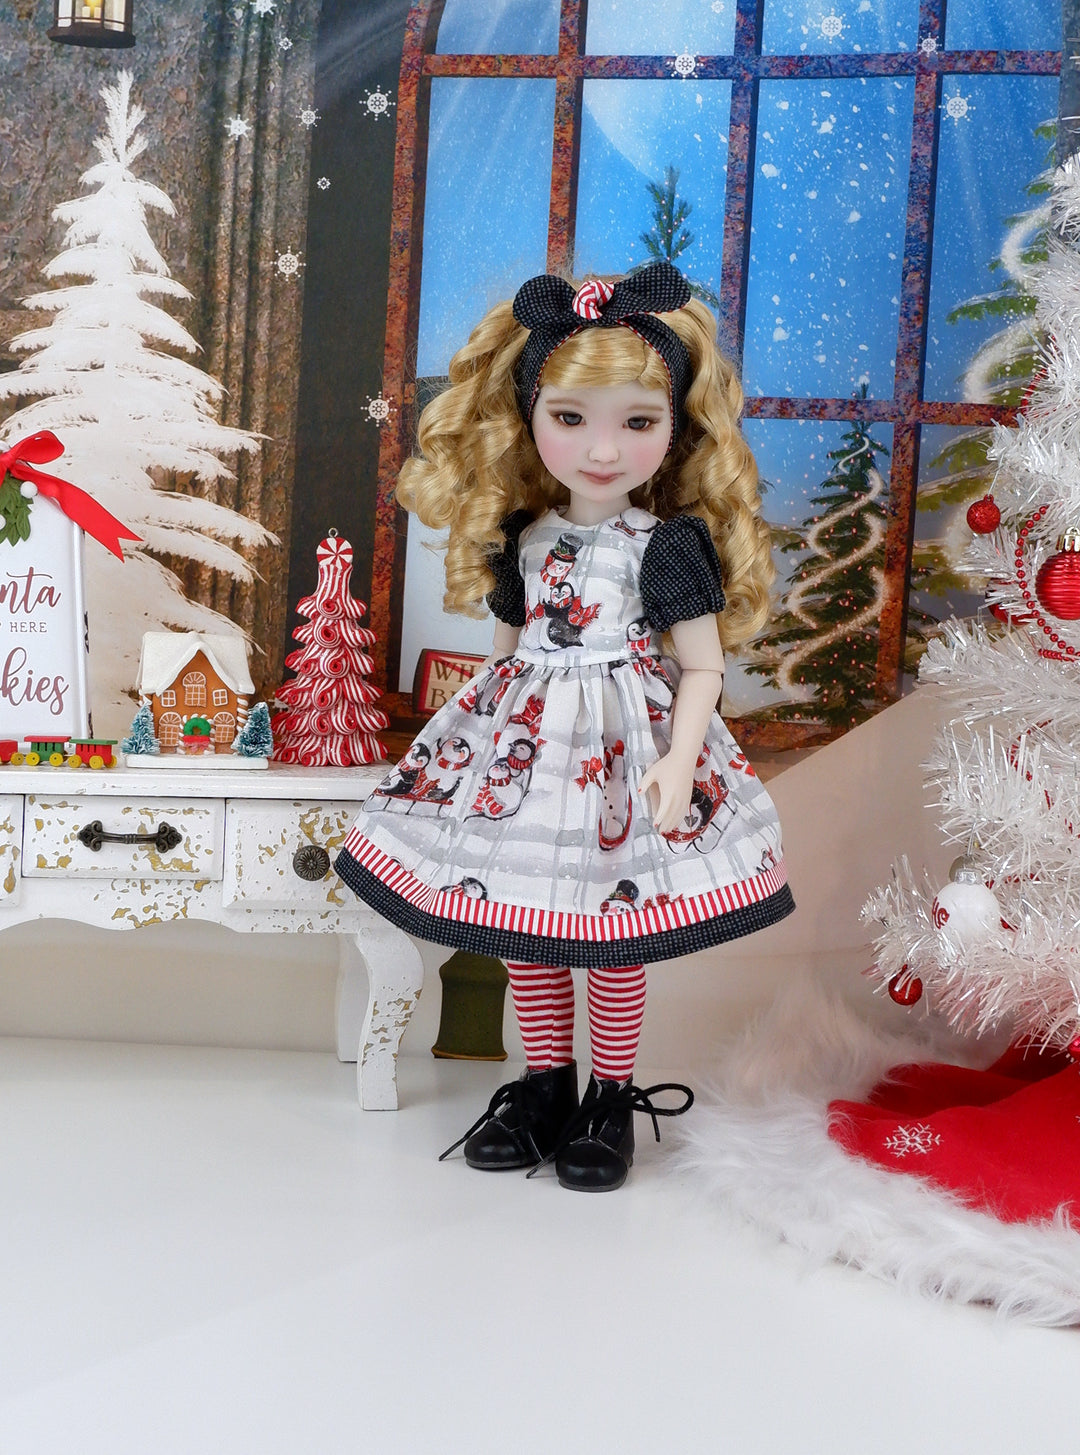 Penguin Plaid - dress and boots for Ruby Red Fashion Friends doll